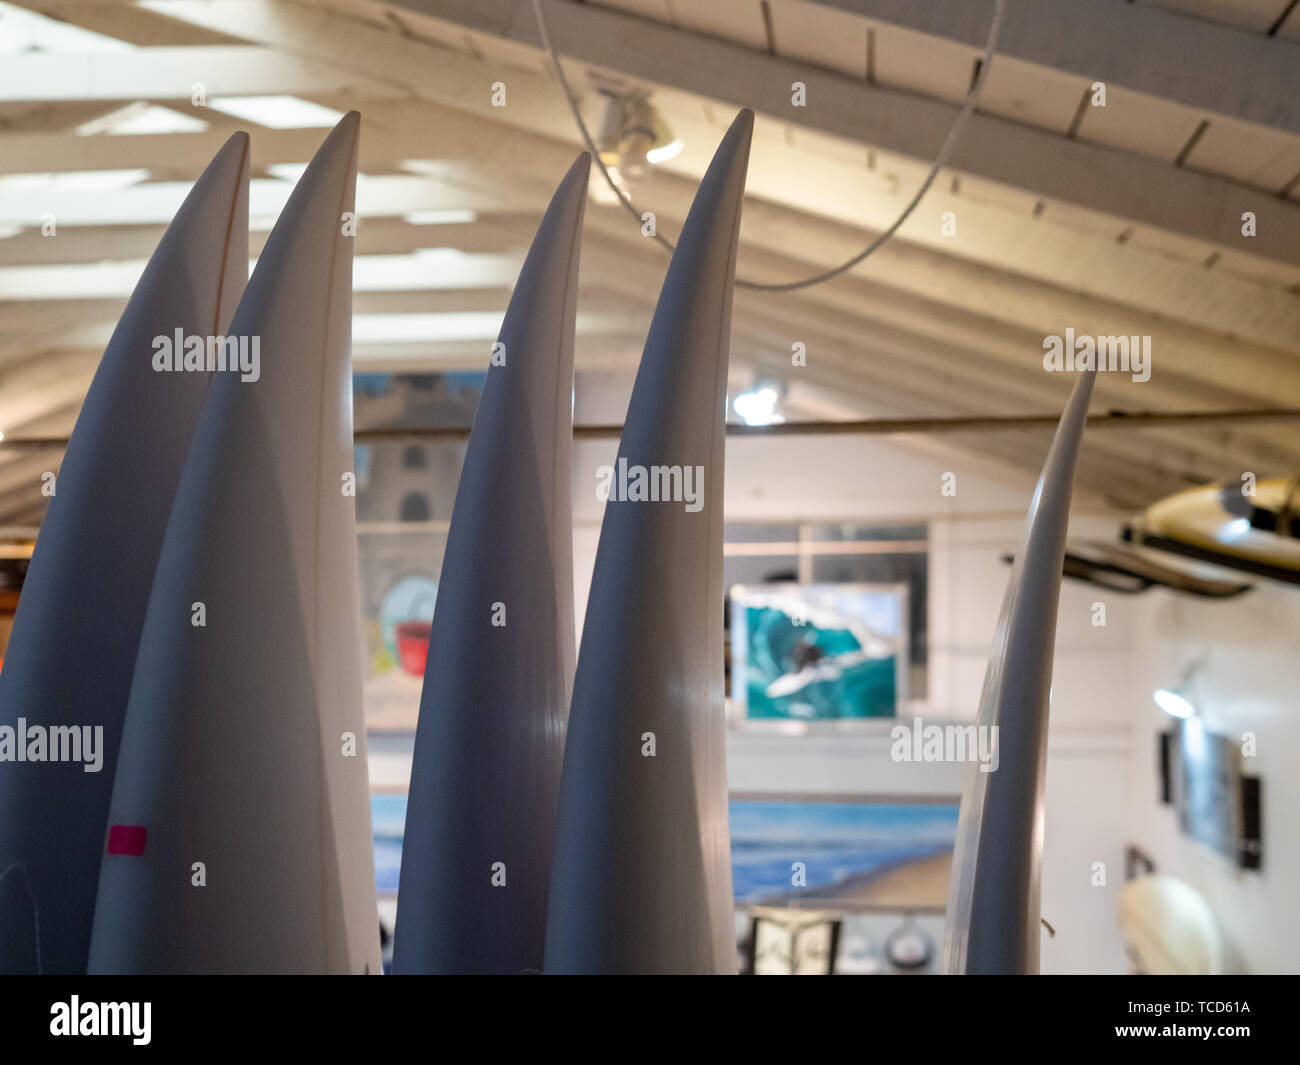 Row of vertical white surfboards displayed inside of store Stock Photo